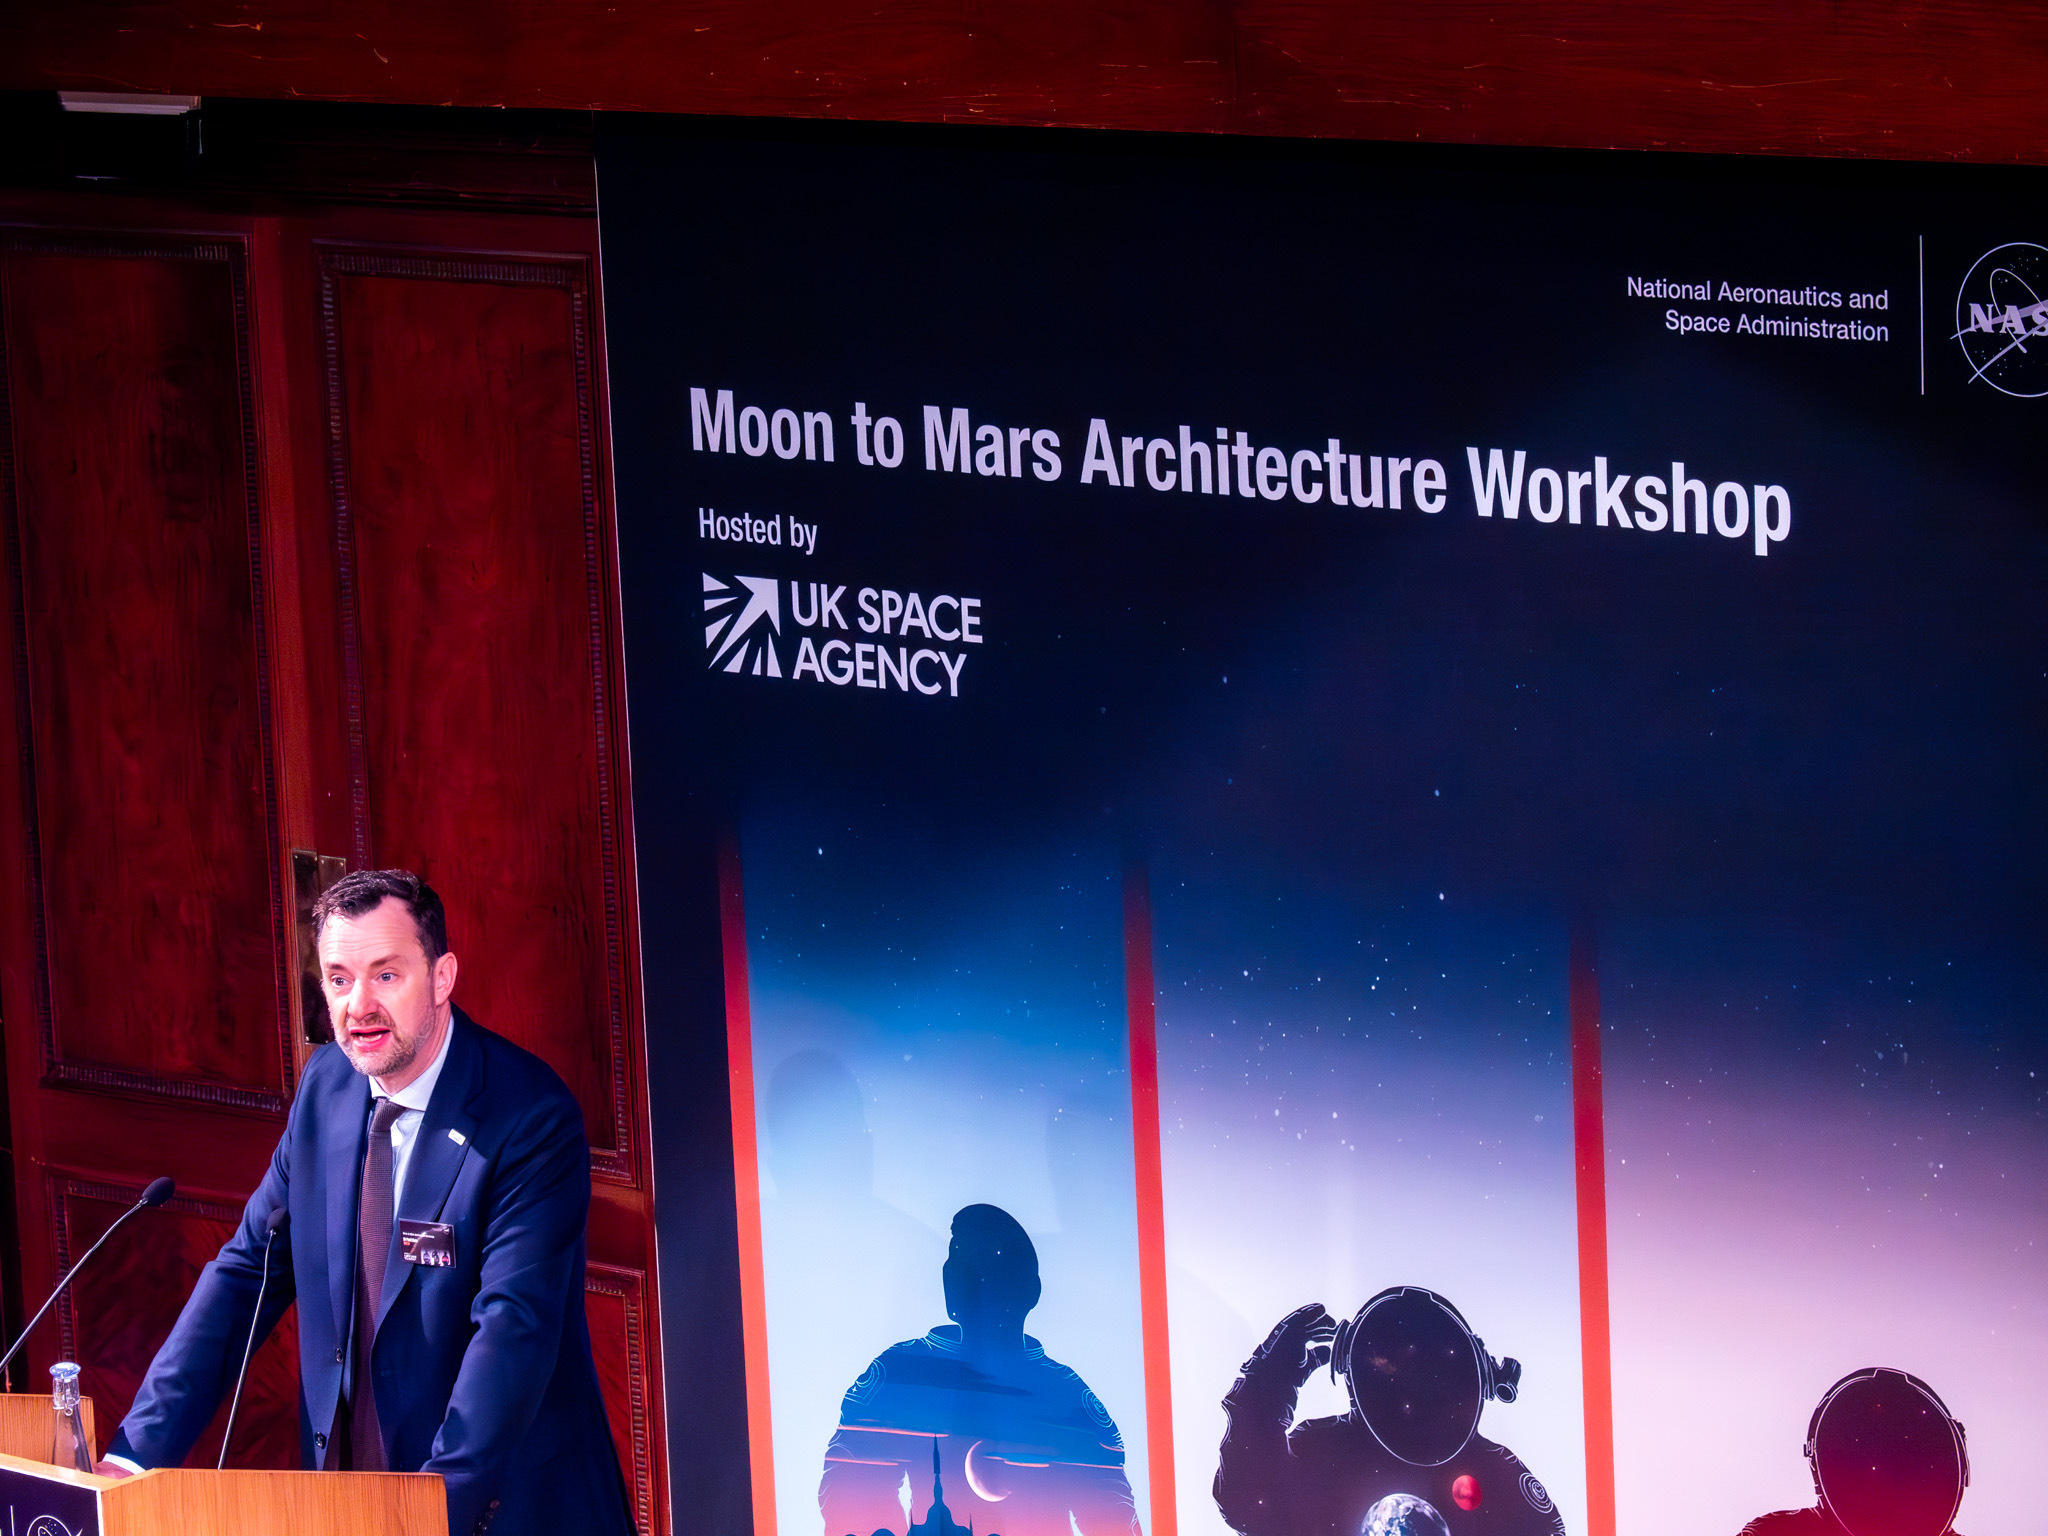 UK Space Agency CEO Dr Paul Bate speaking at the Moon to Mars Architecture workshop at the Royal Institution, London.